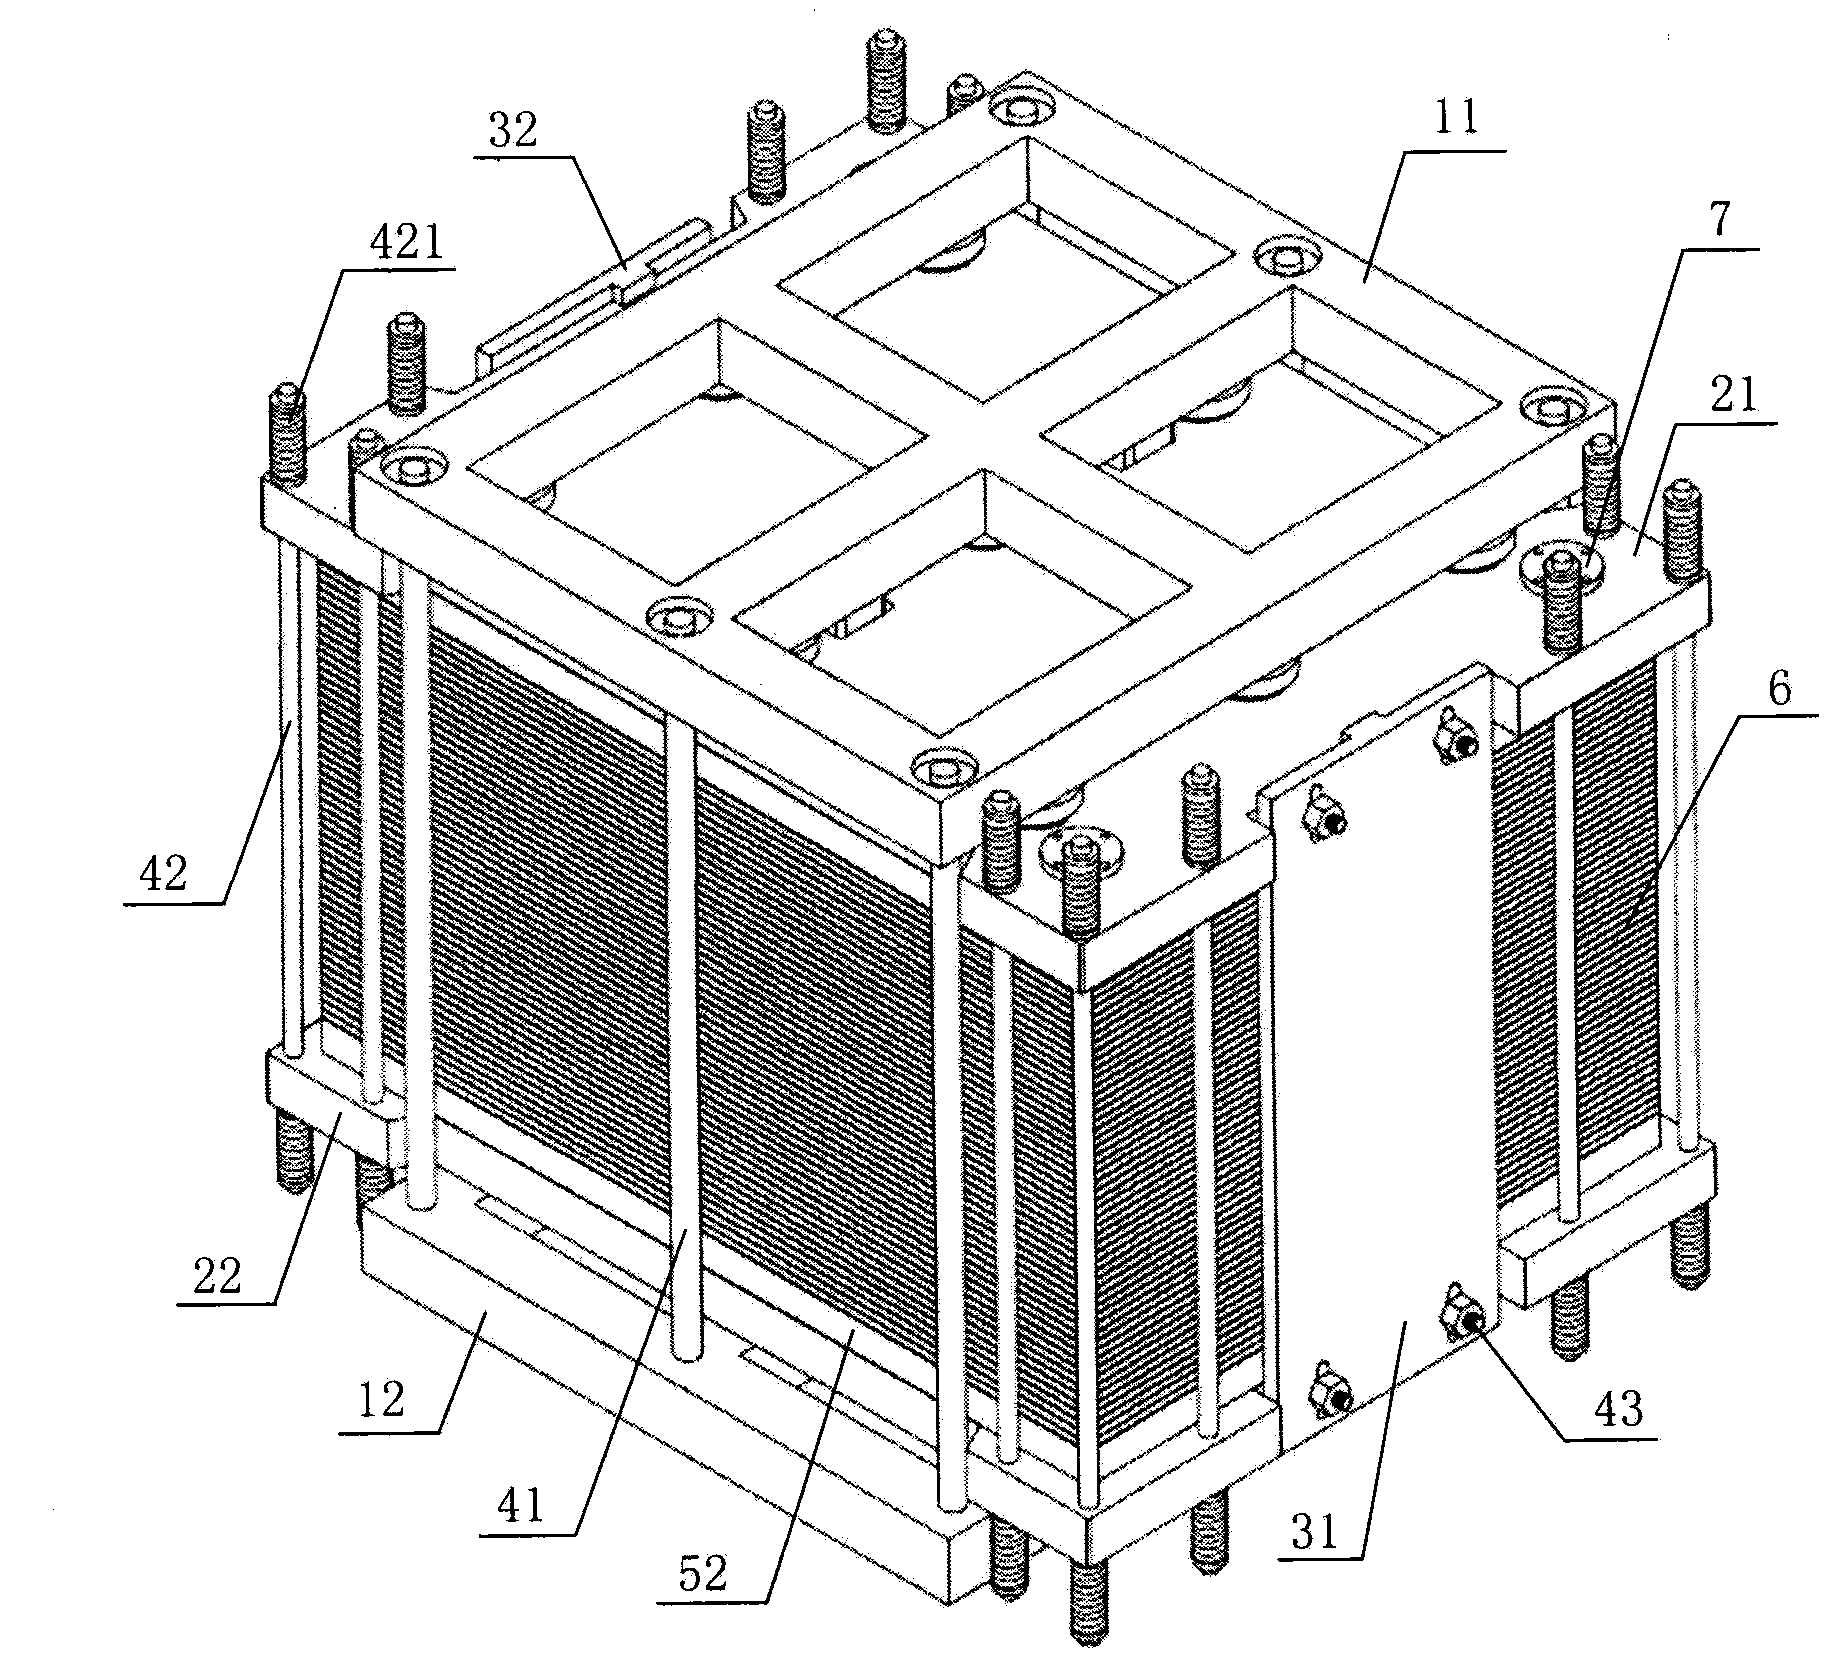 End plate pressing component of redox flow cell galvanic pile